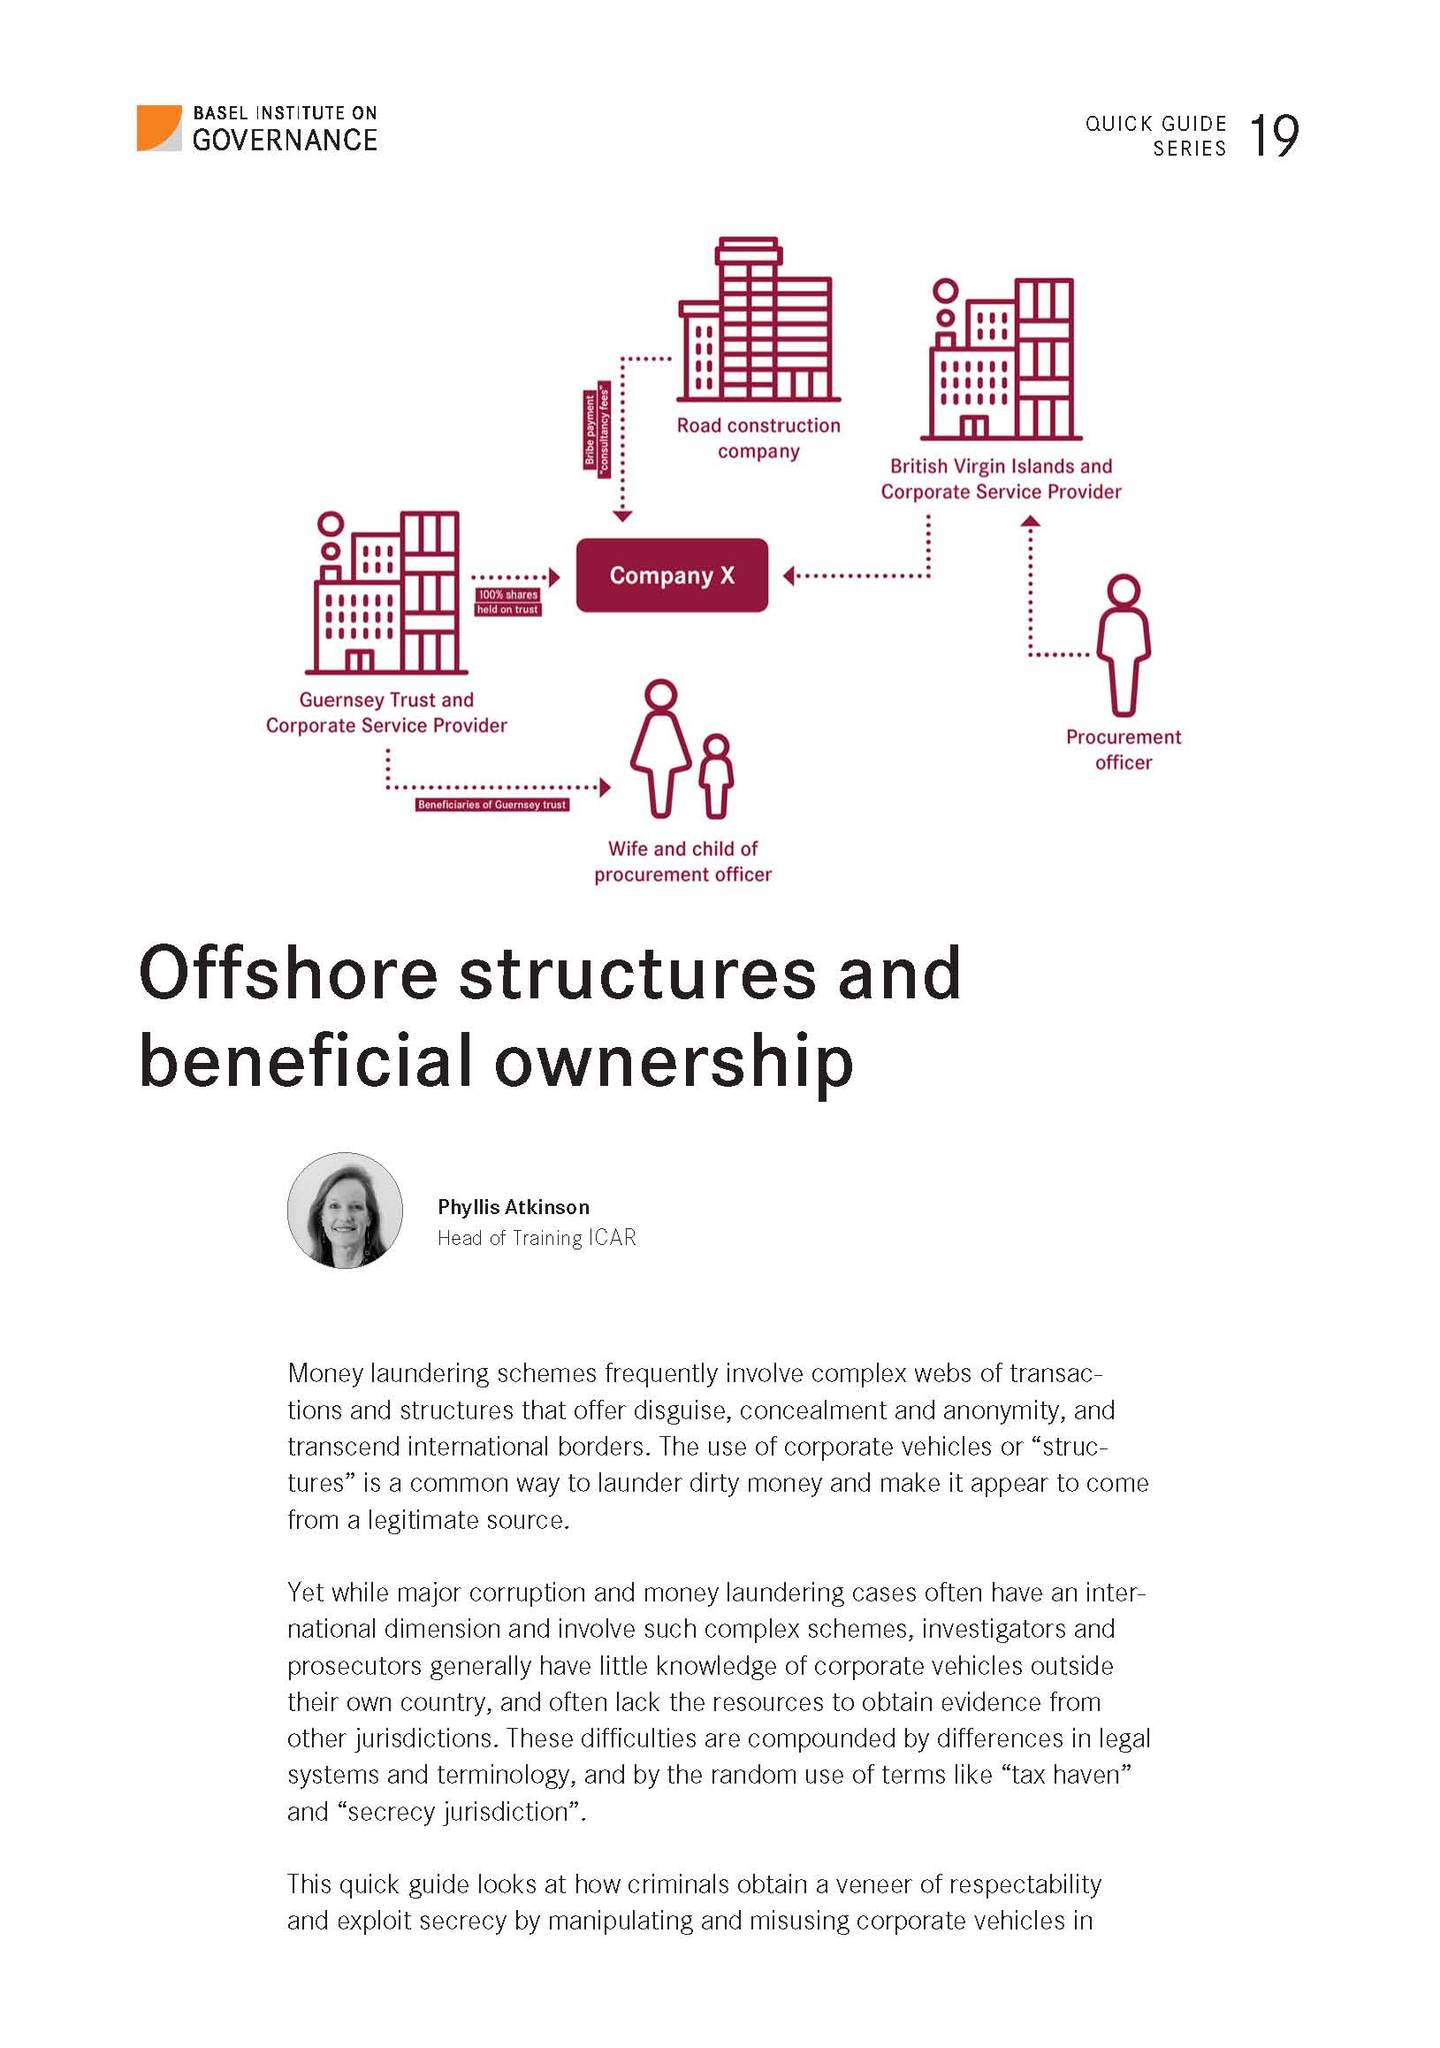 Offshore structures and beneficial ownership